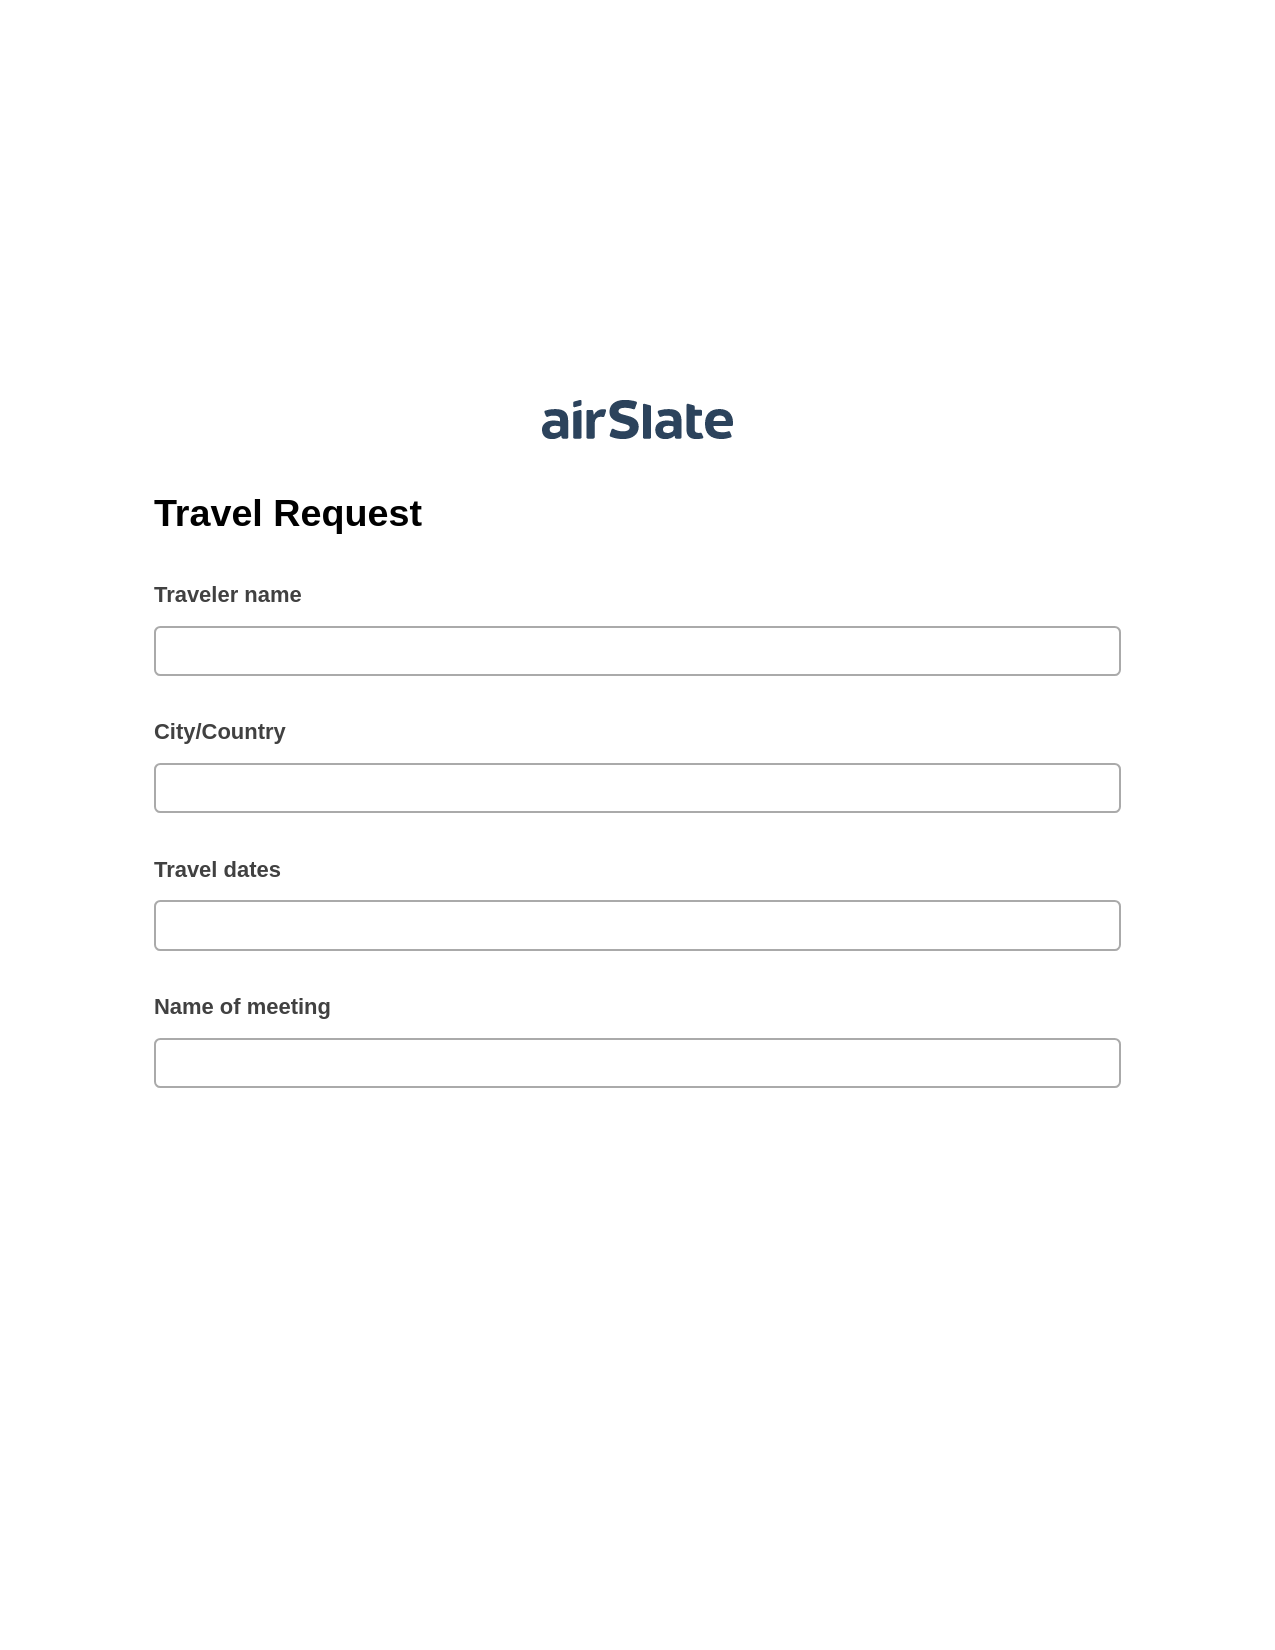 Travel Request Pre-fill from Salesforce Record Bot, Pre-fill with Custom Data Bot, Export to Excel 365 Bot